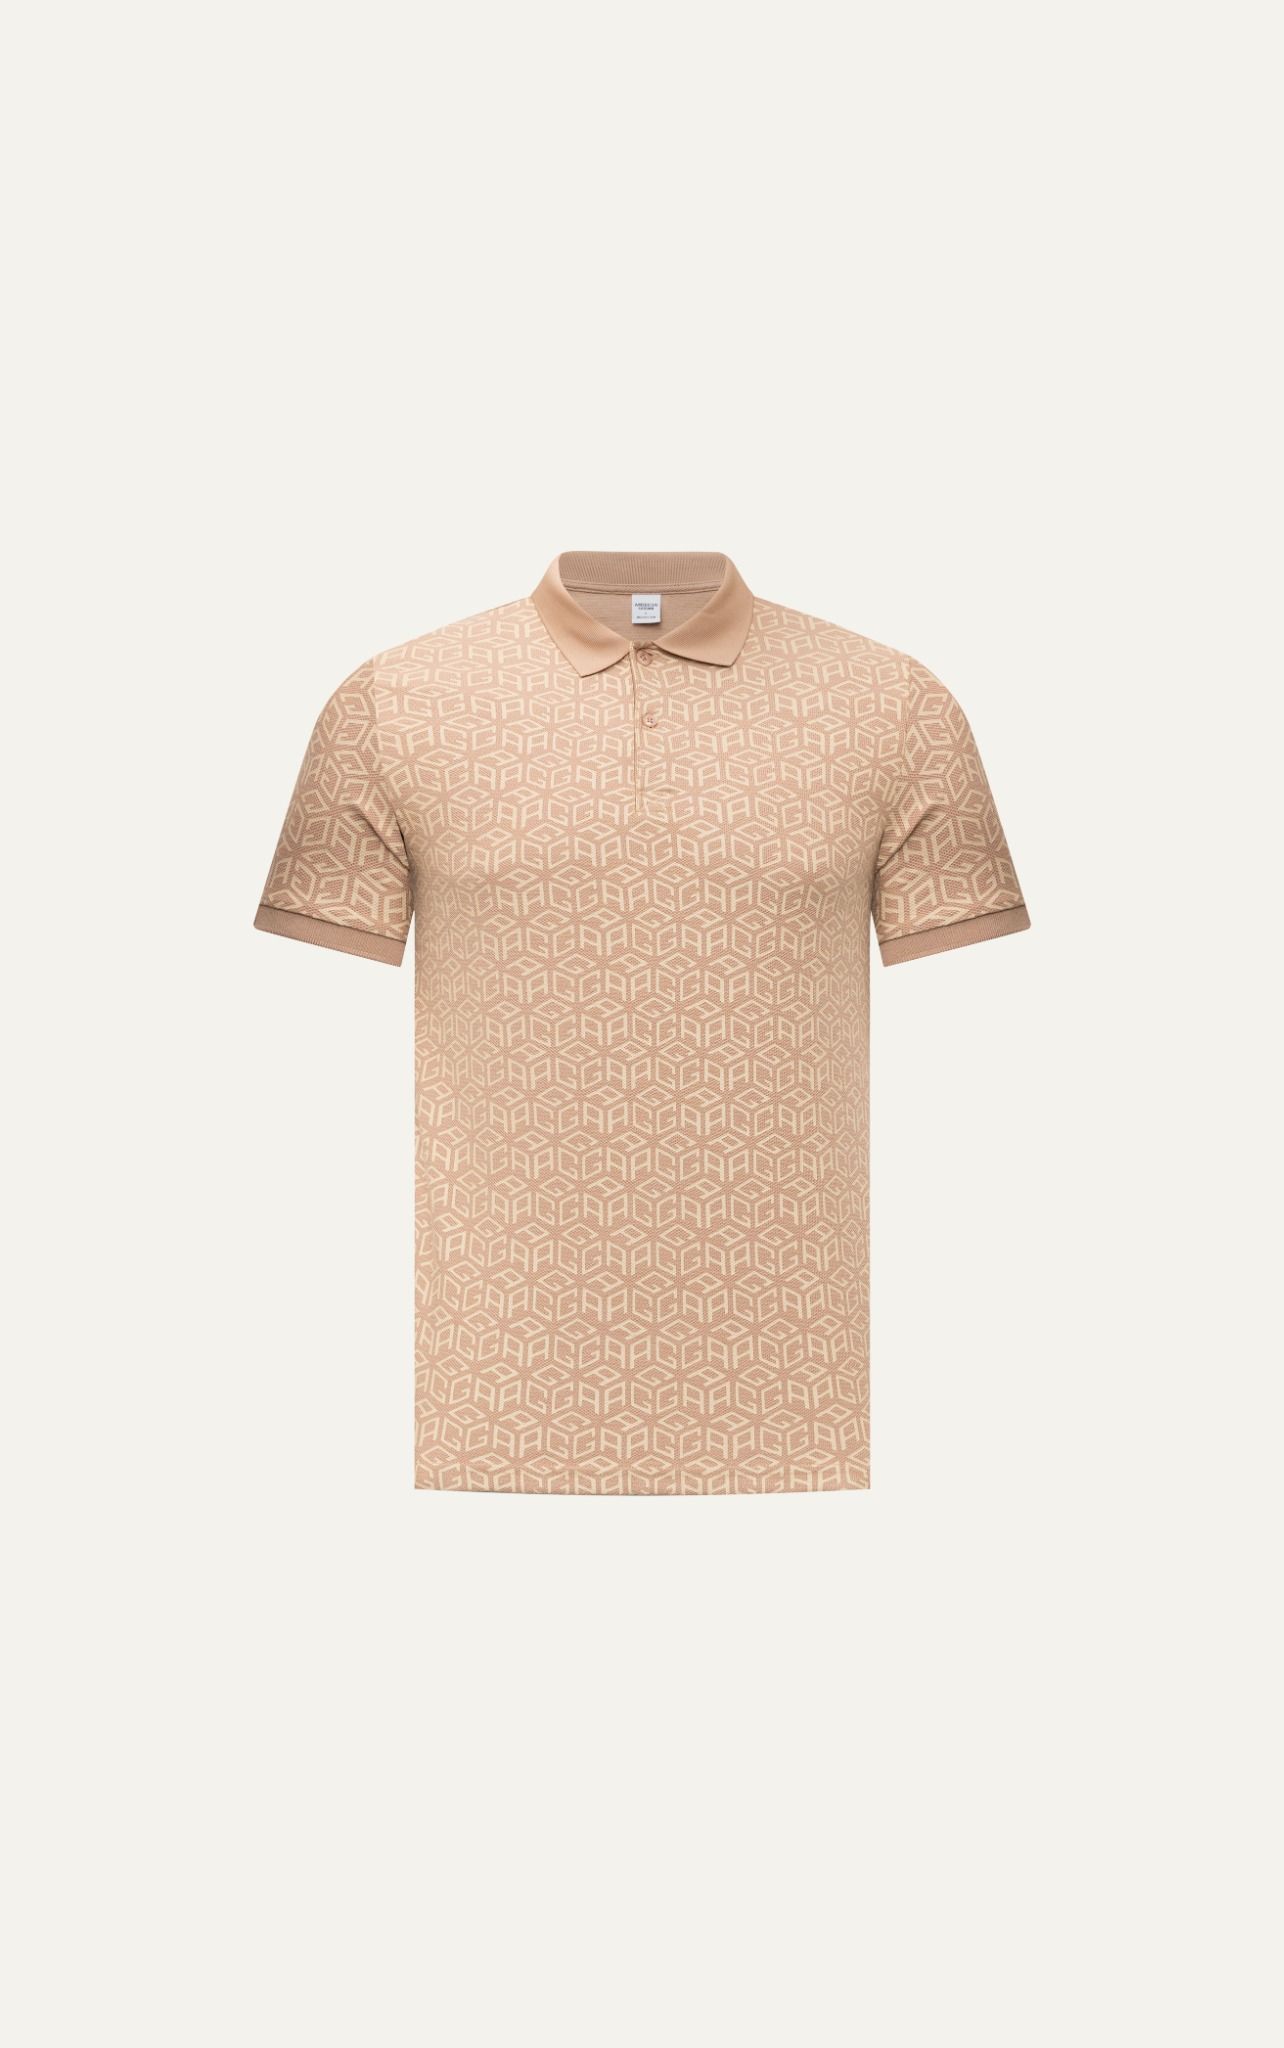  T54 FACTORY SLIMFIT DETAIL AG POLO - BROWN 